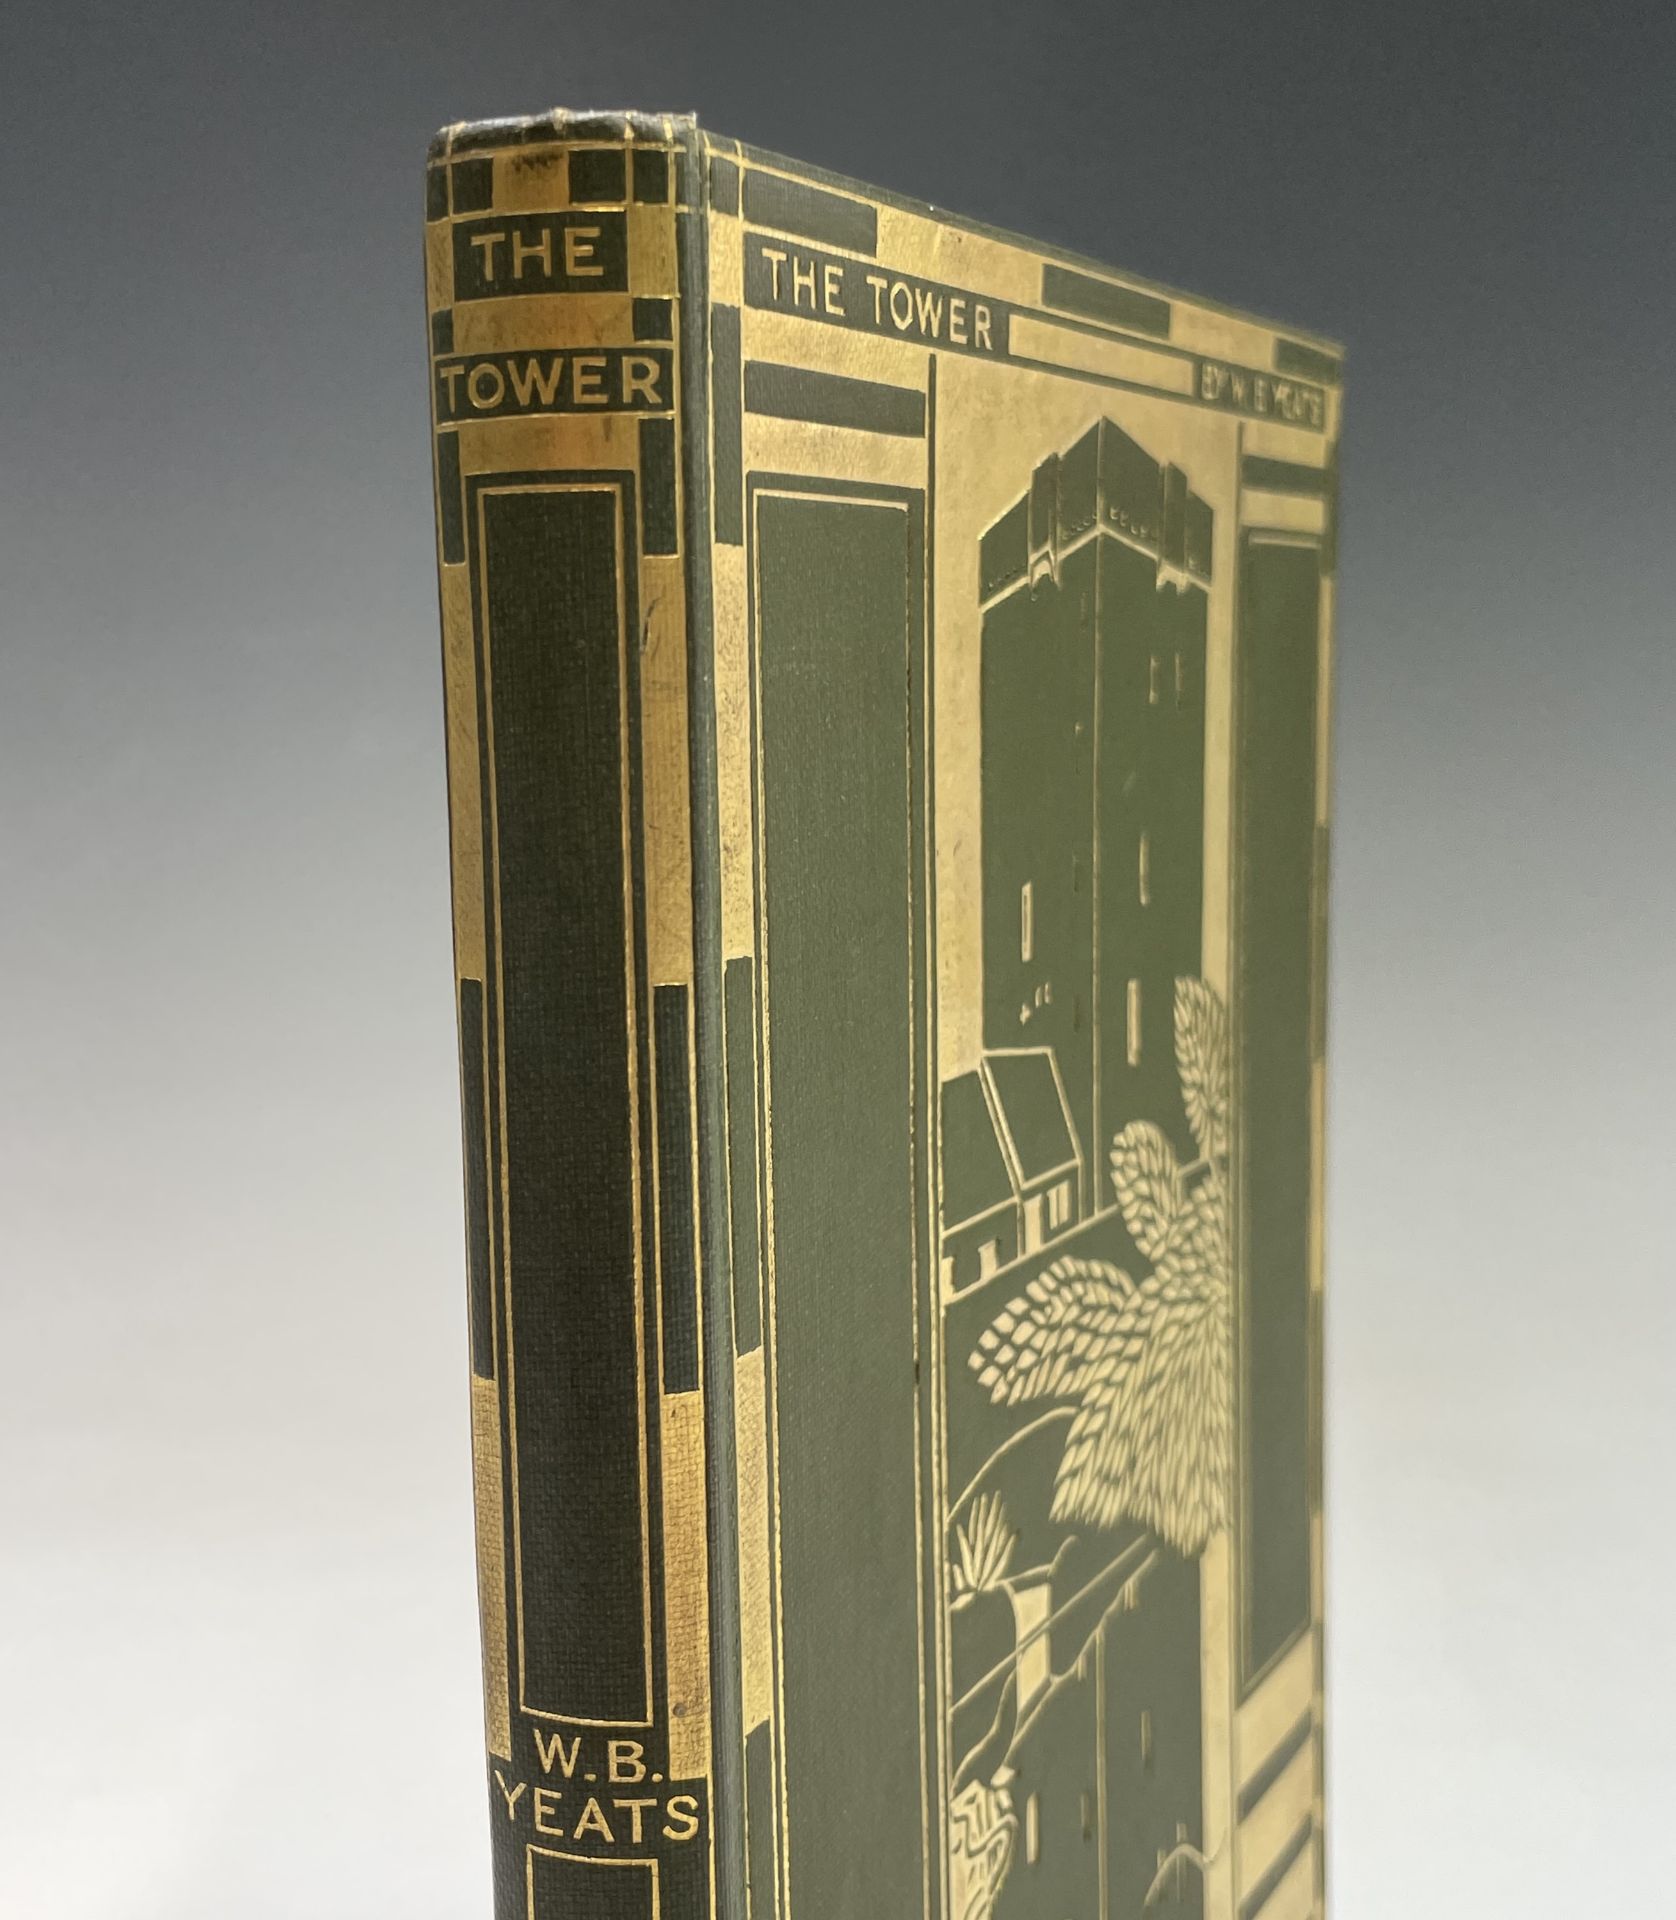 WILLIAM BUTLER YEATS. 'The Tower.' Original cloth gilt, designed by Thomas Sturge Moore, vg - Image 8 of 8